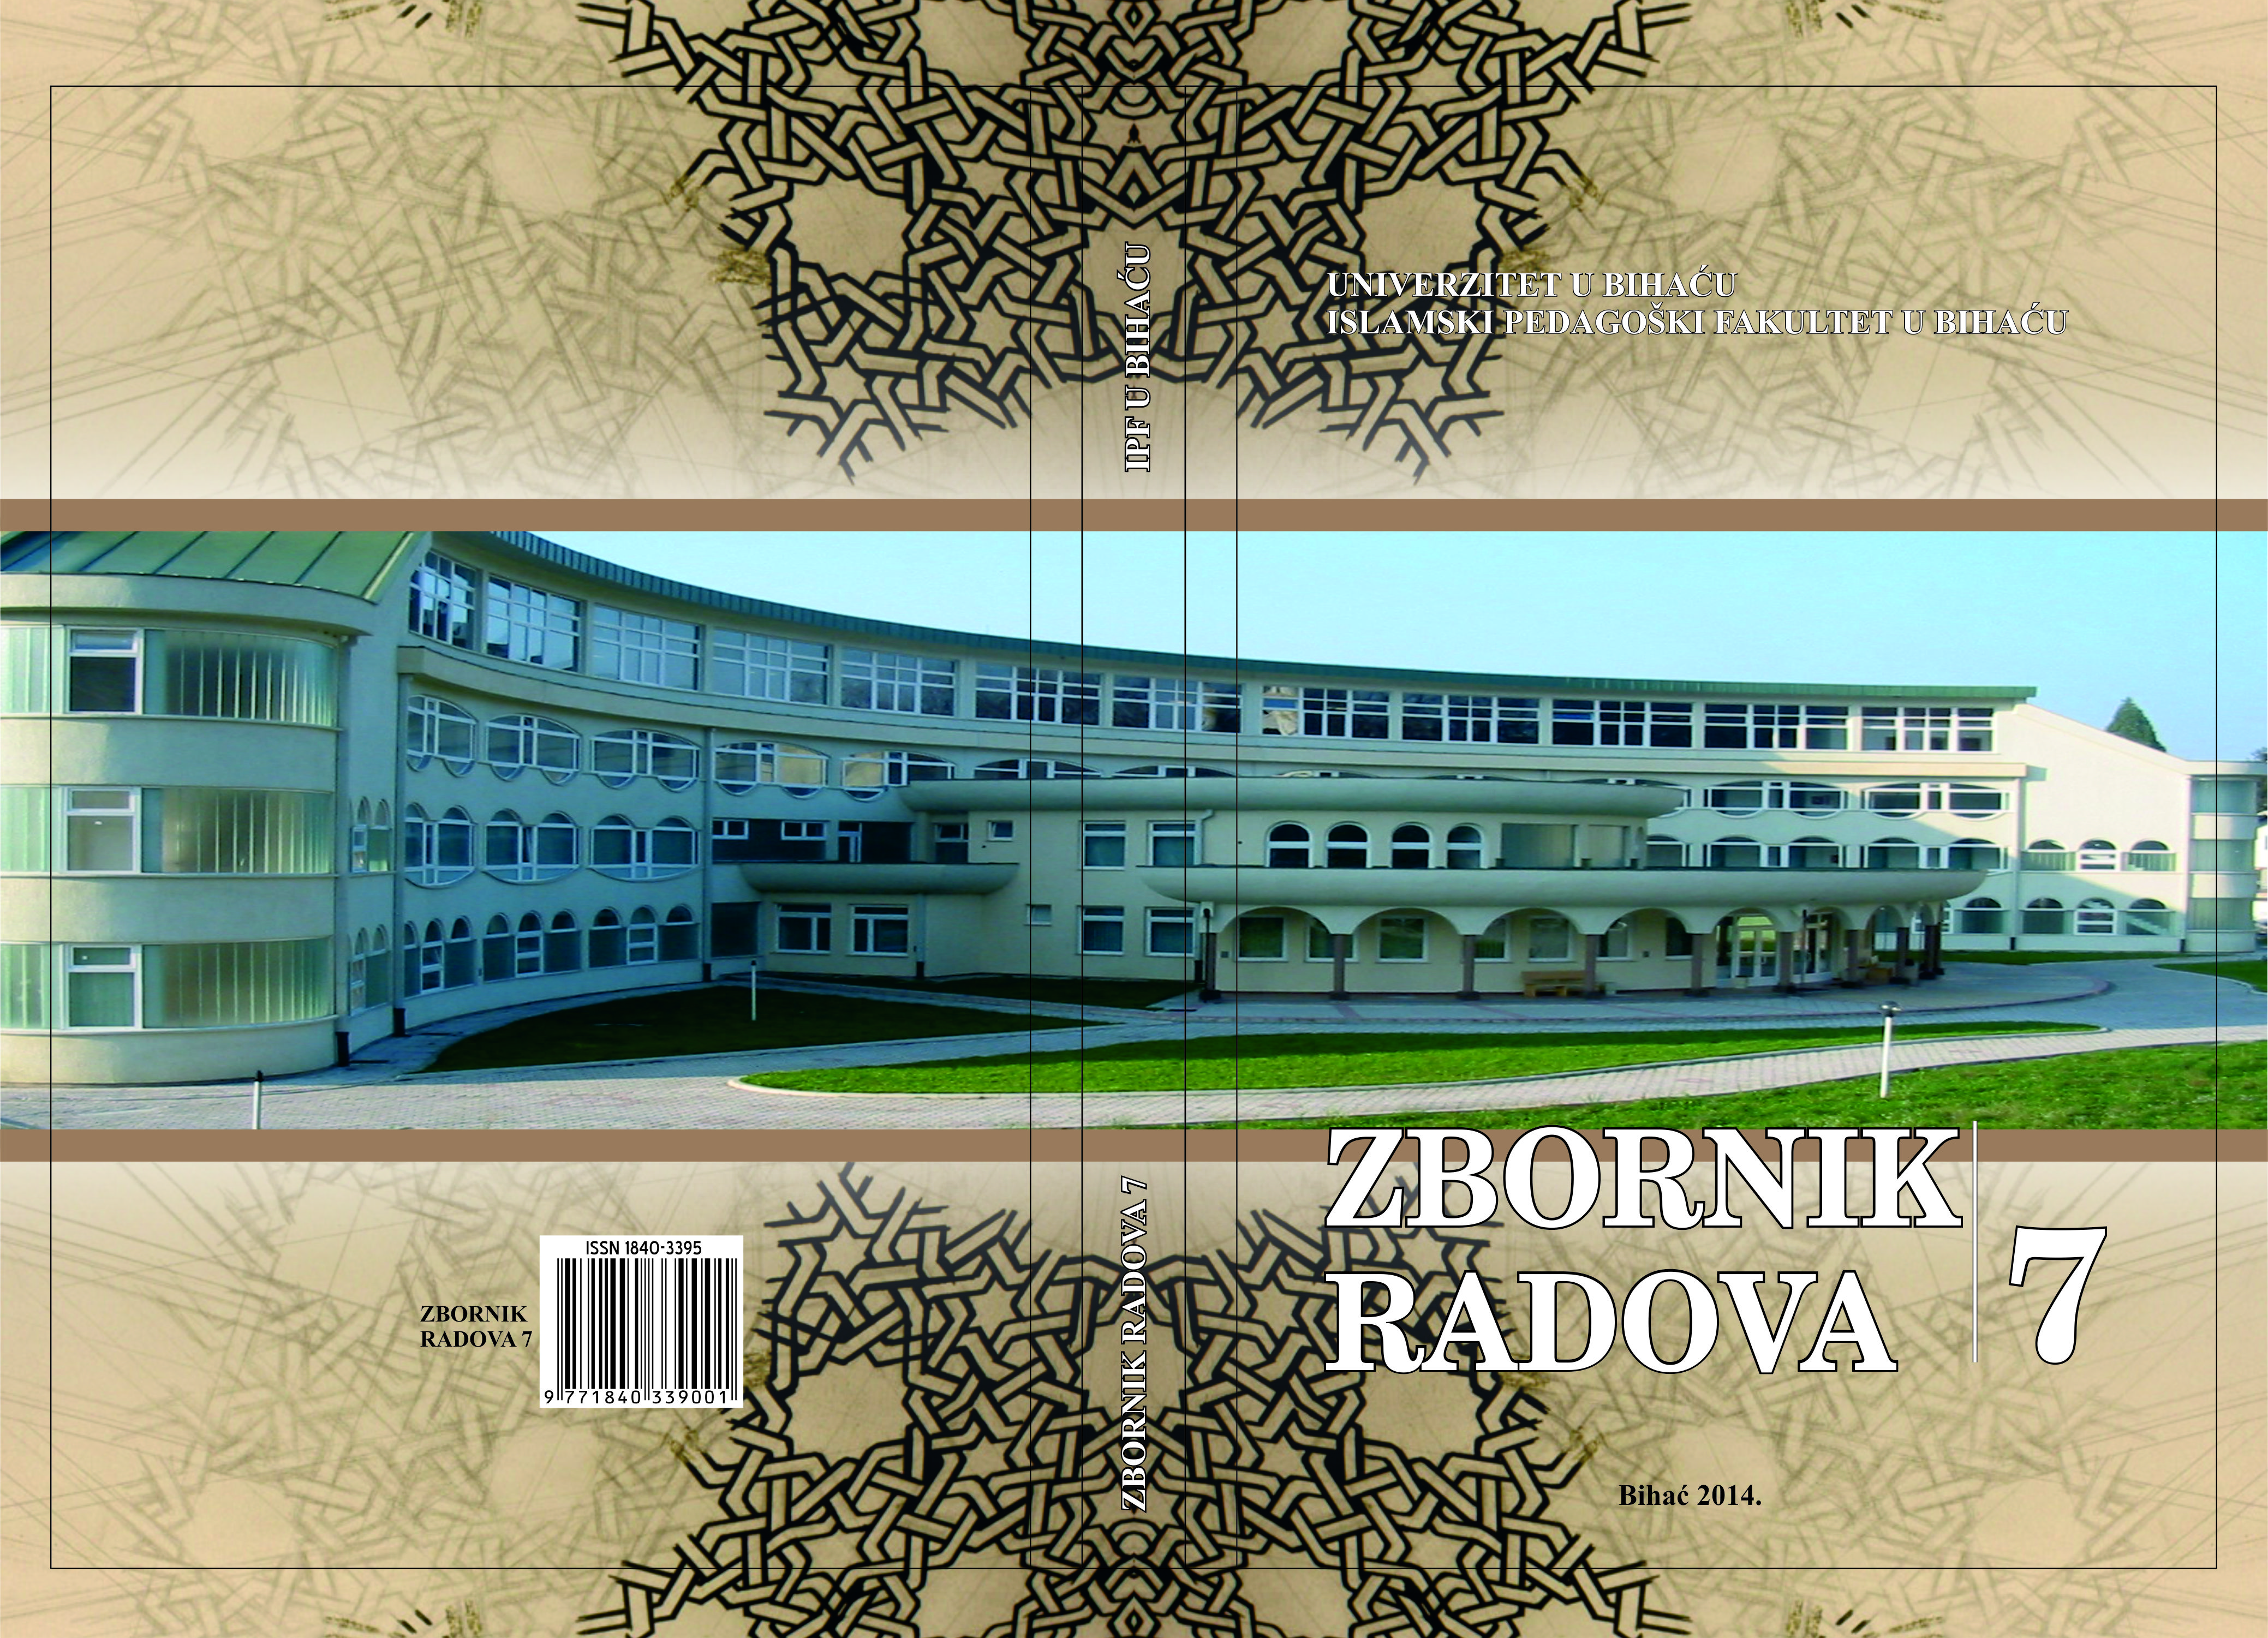 CRIMINAL OFFENSE 'CRIME AGAINST HUMANITY' IN THE FINAL VERDICTS FOR CRIMES COMMITED IN THE BOSNIAN KRAJINA Cover Image